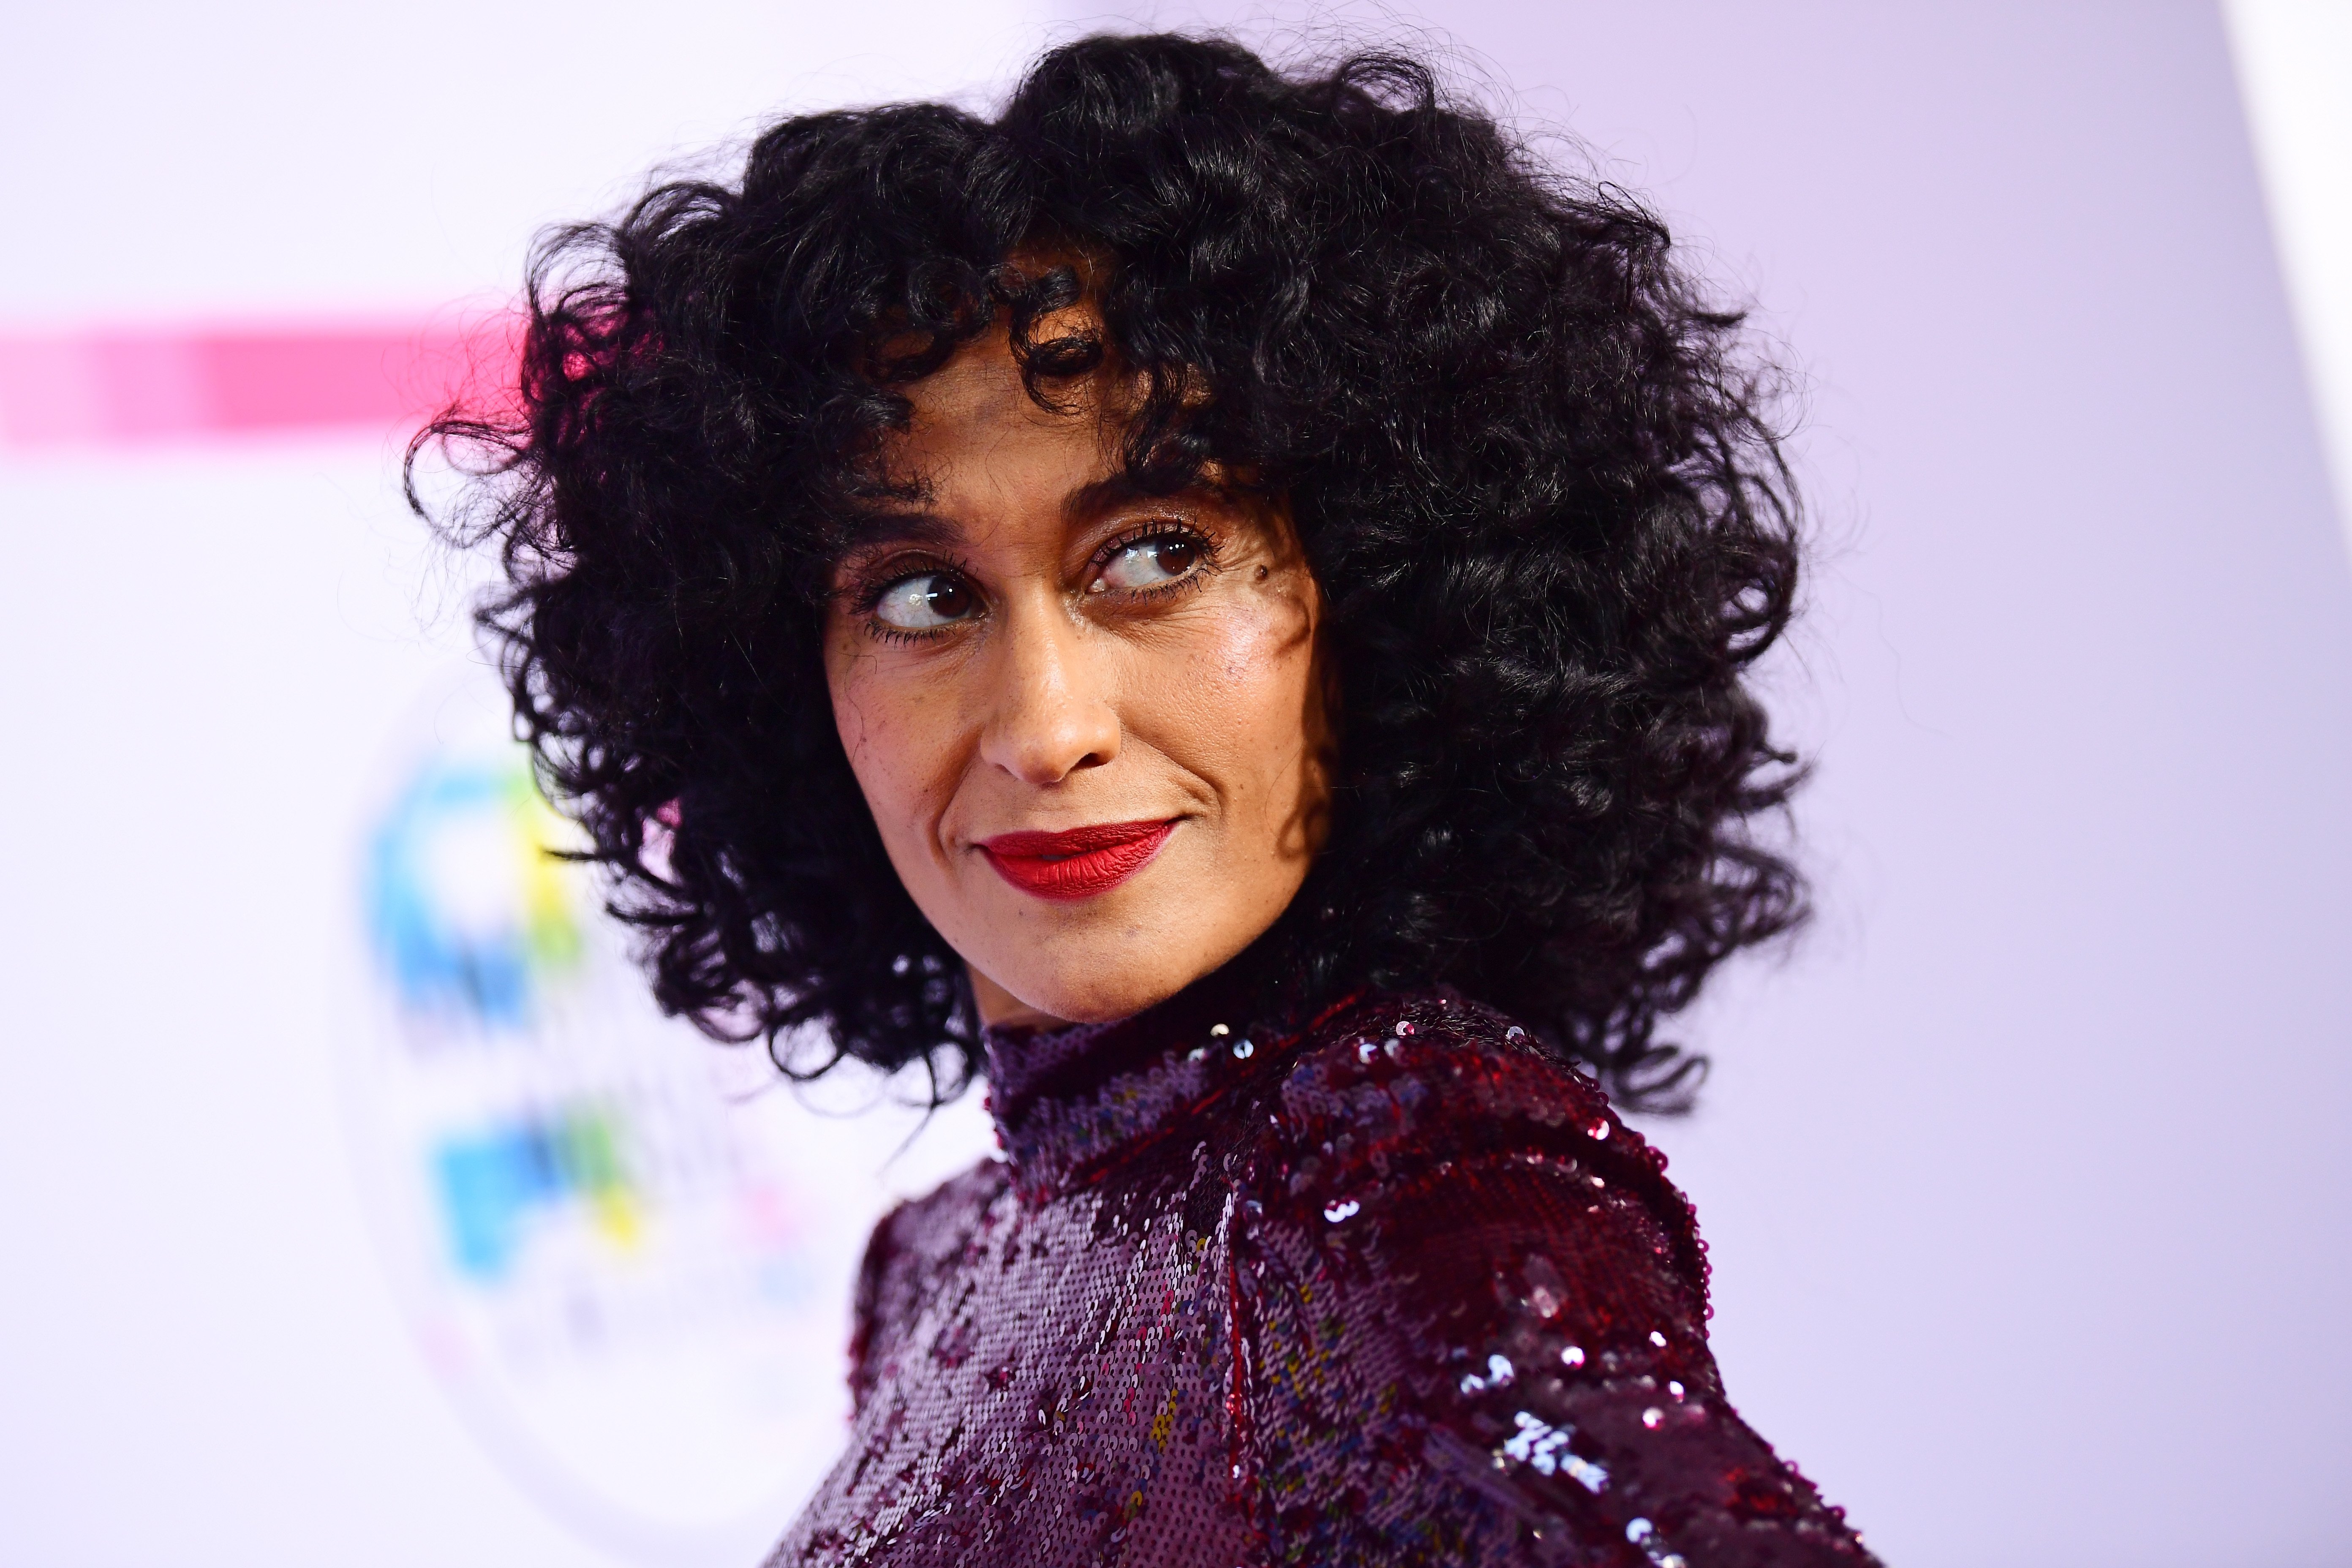 Tracee Ellis Ross at the American Music Awards on Nov. 19, 2017 in California | Photo: Getty Images